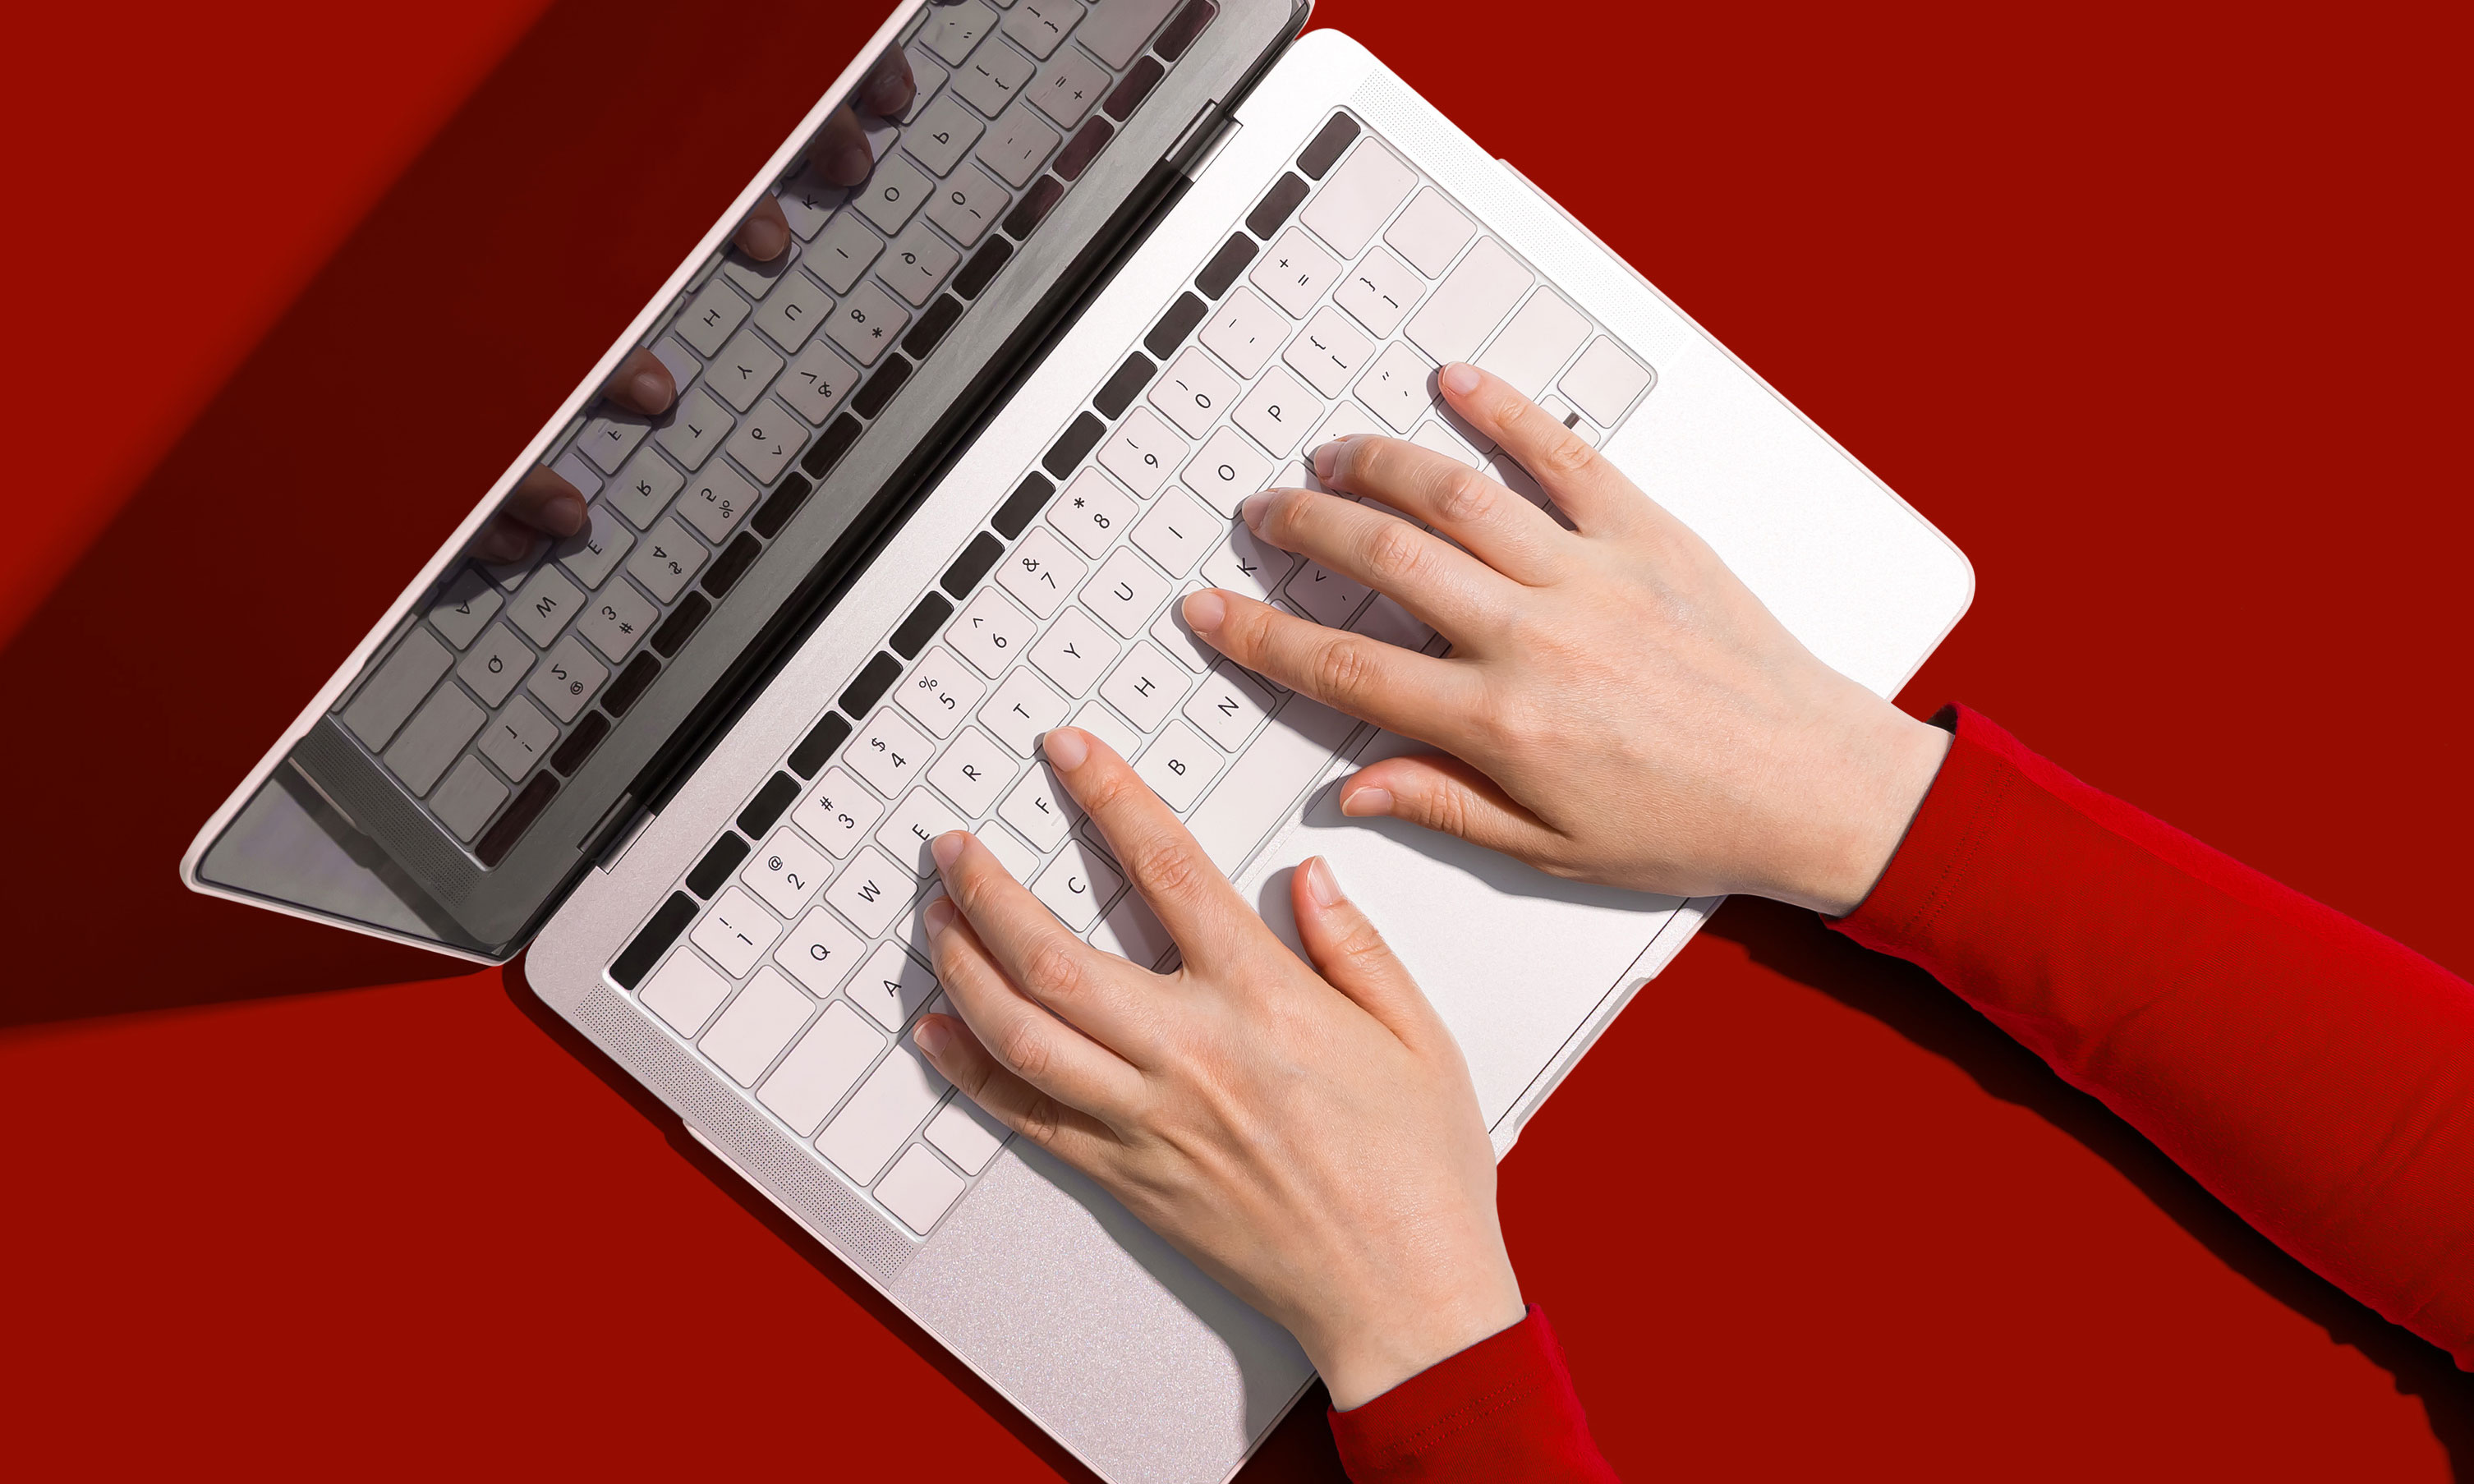 Top down view of hands typing on a laptop keyboard